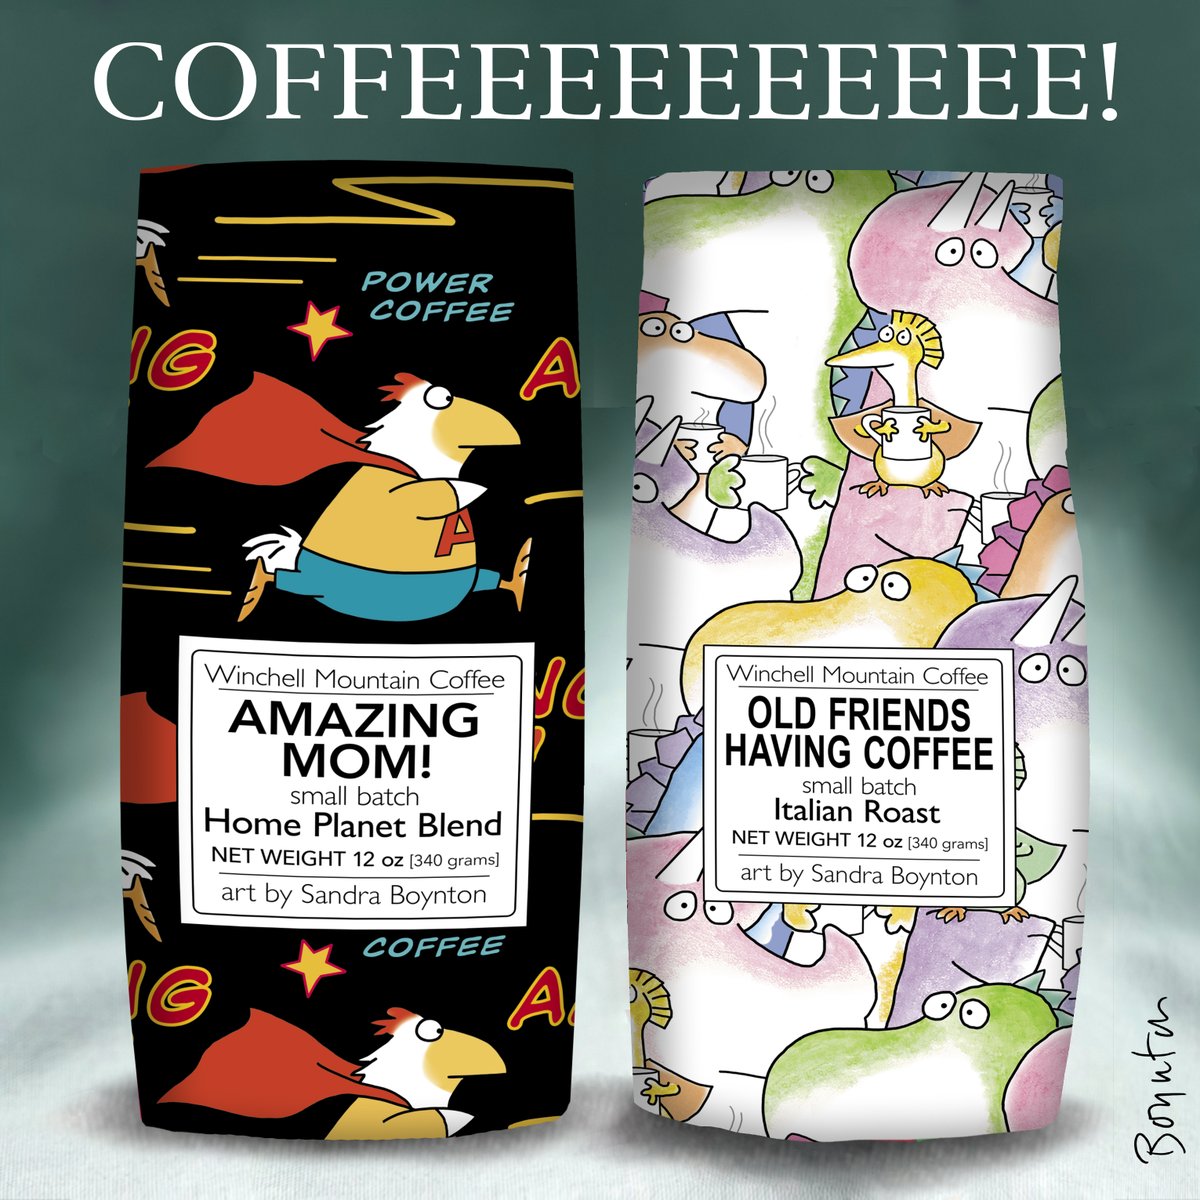 Want to show your fabulous mom—or an important mothering person in your life—how grateful you are for everything? Send her some great, great coffee from Winchell Mountain! It's the gift that says, 'I love you!' And also yells: 'WAKE UP! IT'S MOTHER'S DAY!' #MothersDay